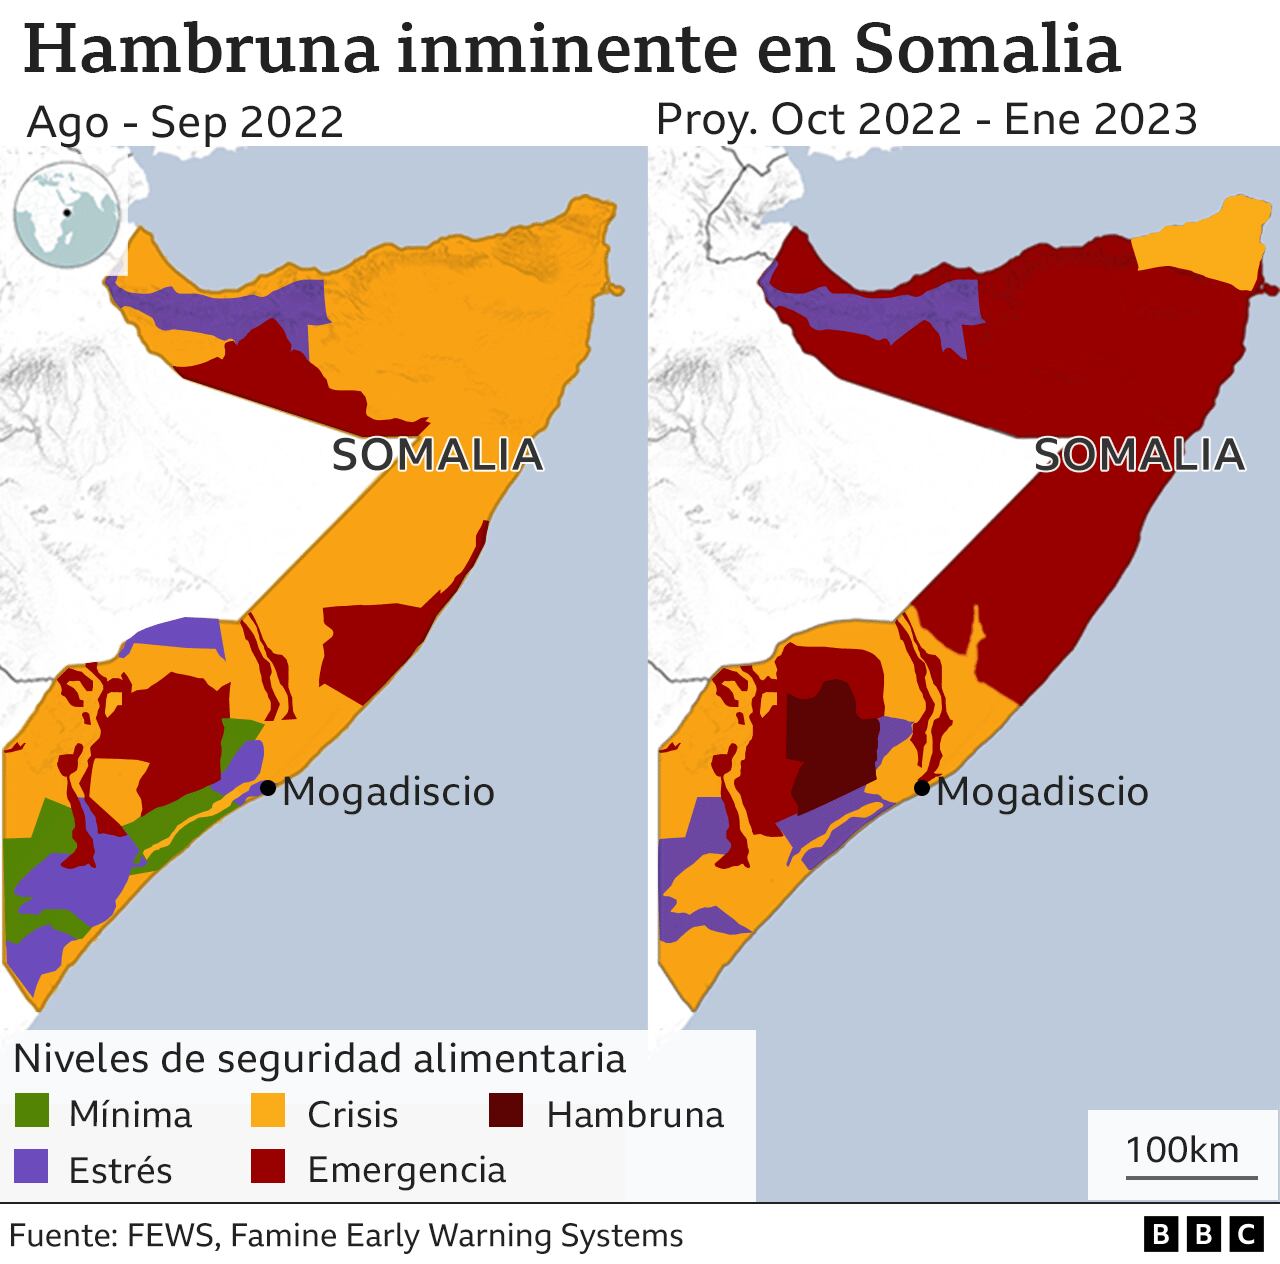 Map of Somalia showing the sites affected by the famine